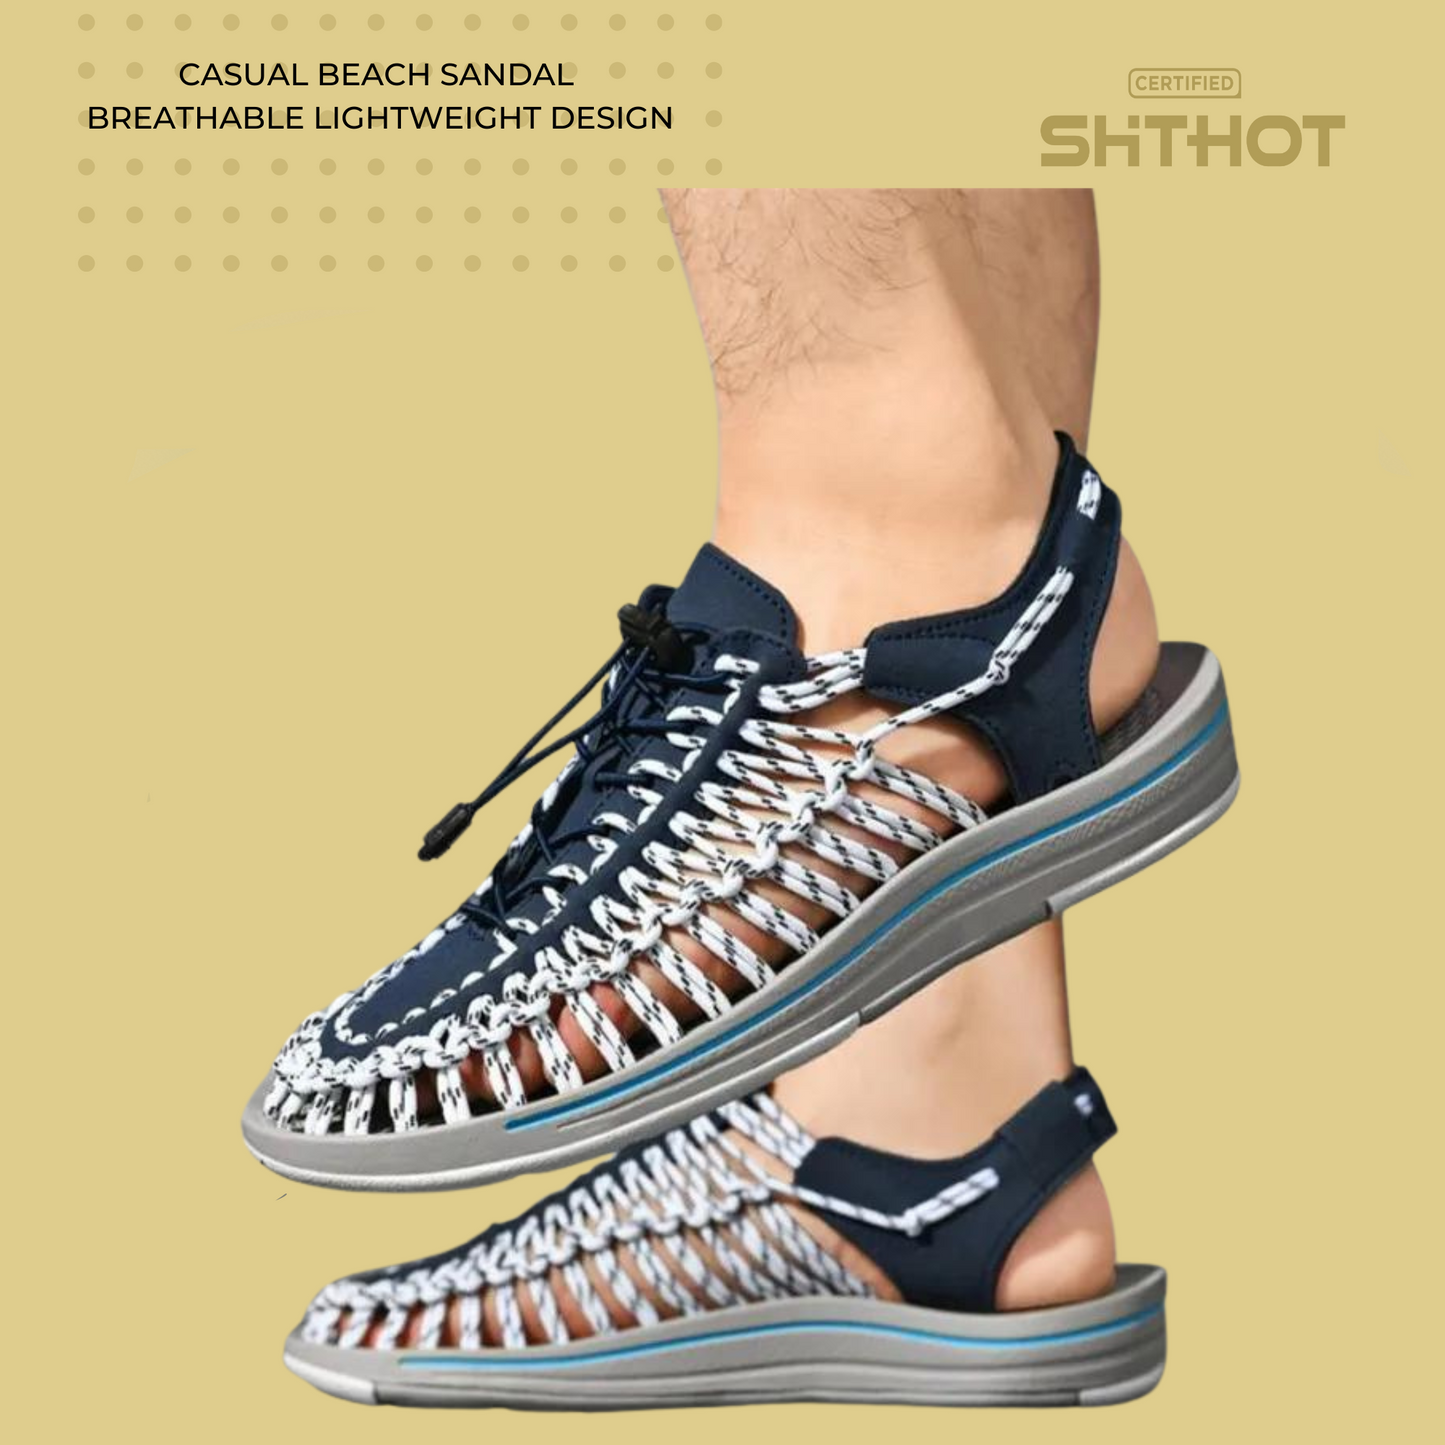 Certified ShitHot Handmade Sandals - Wave Weaver